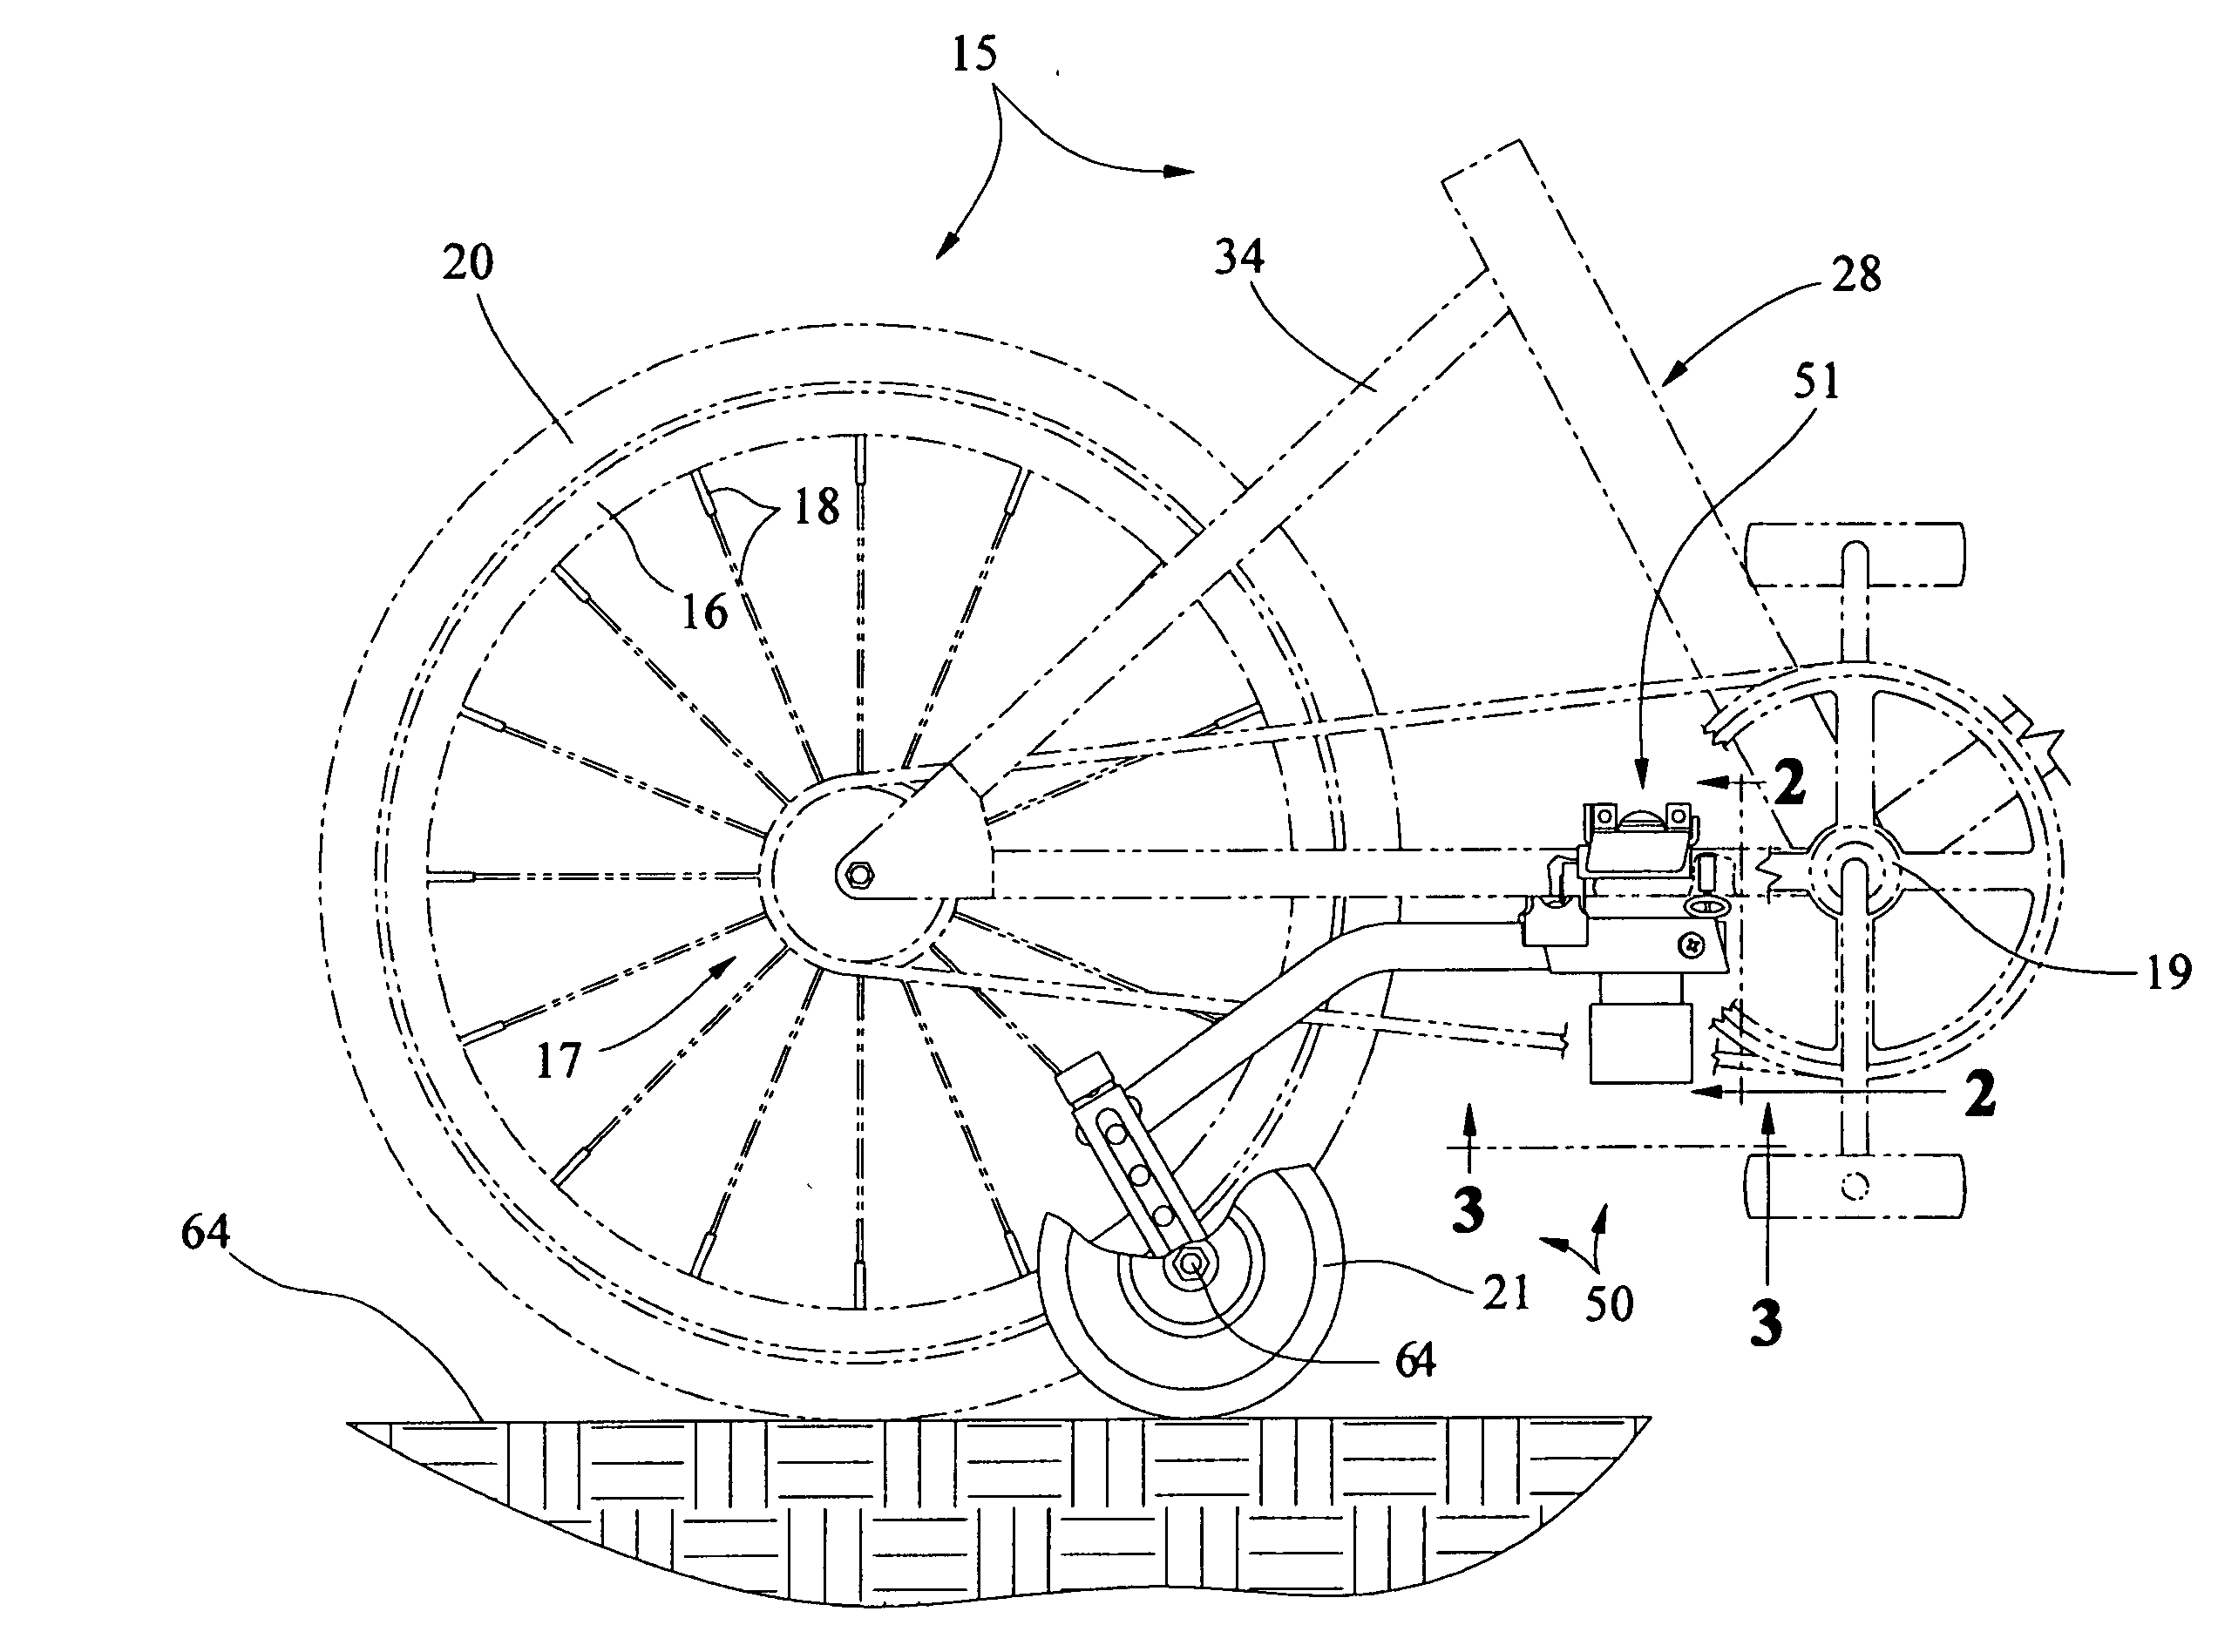 Bicycle training wheel assembly